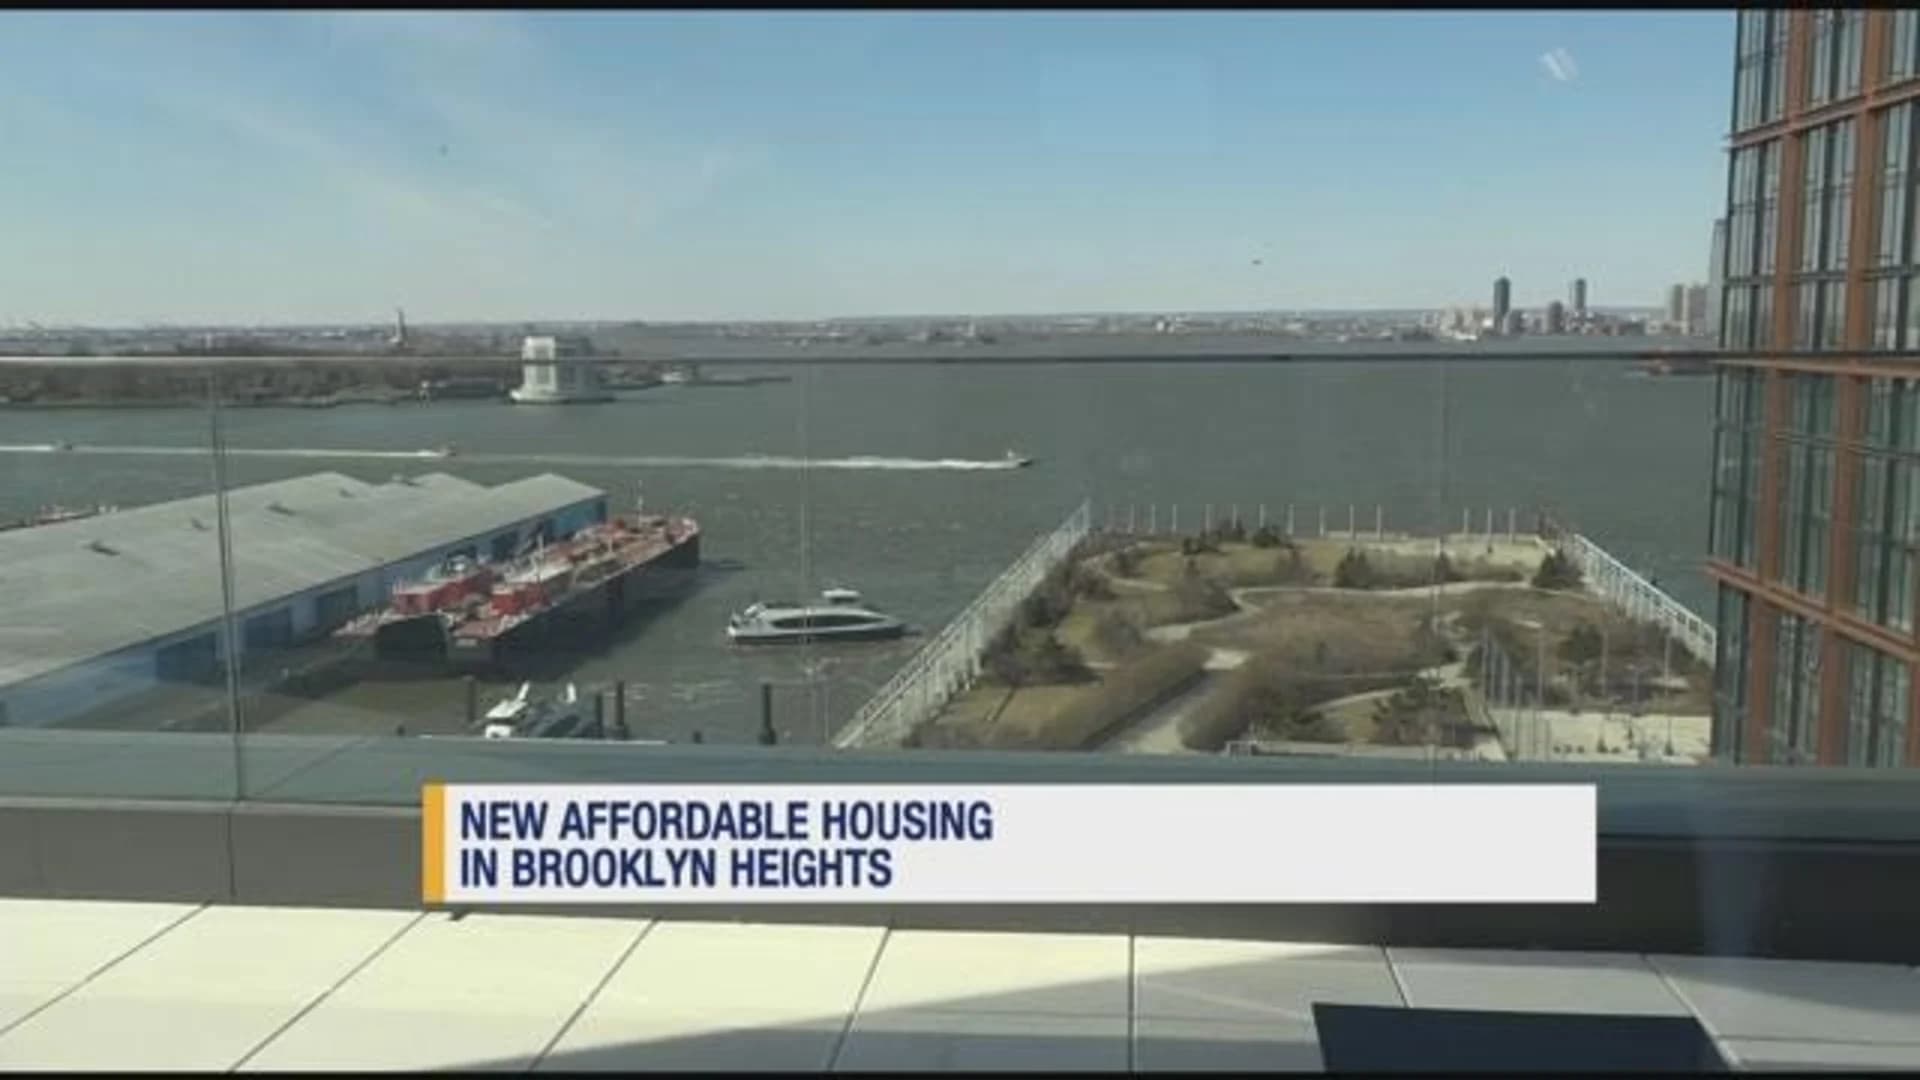 Brooklyn Heights affordable housing development seen as game changer